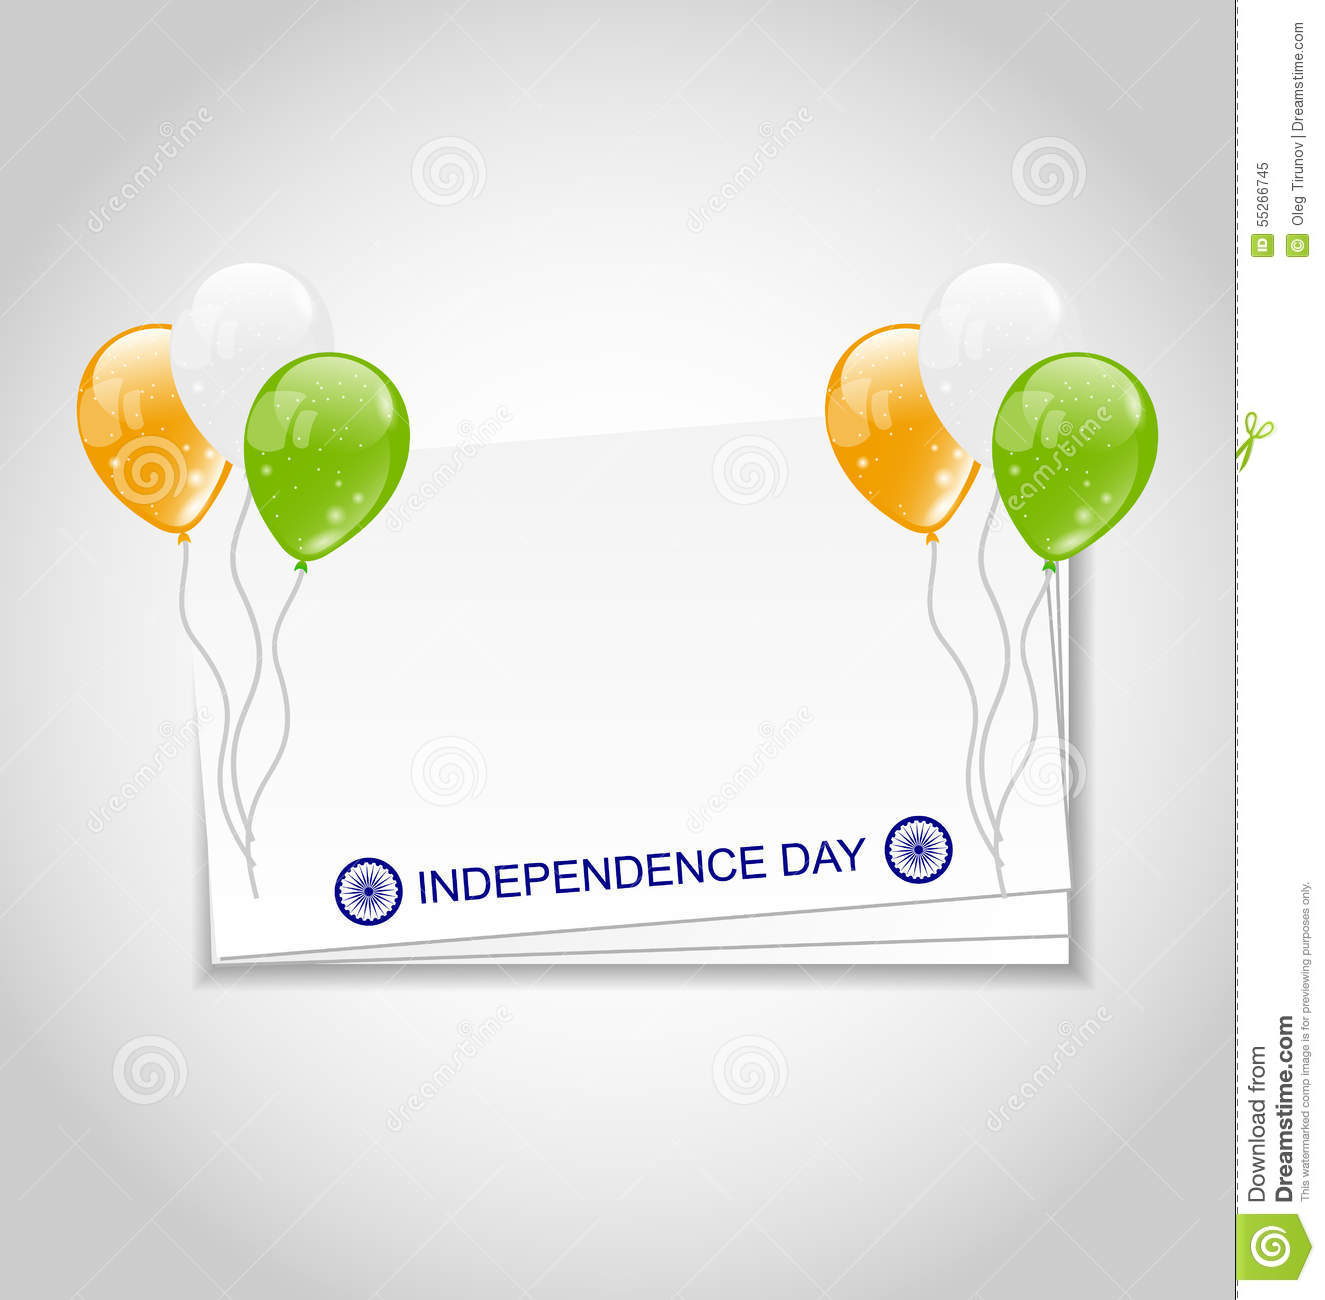 Happy Independence Day Greeting Card With Balloons